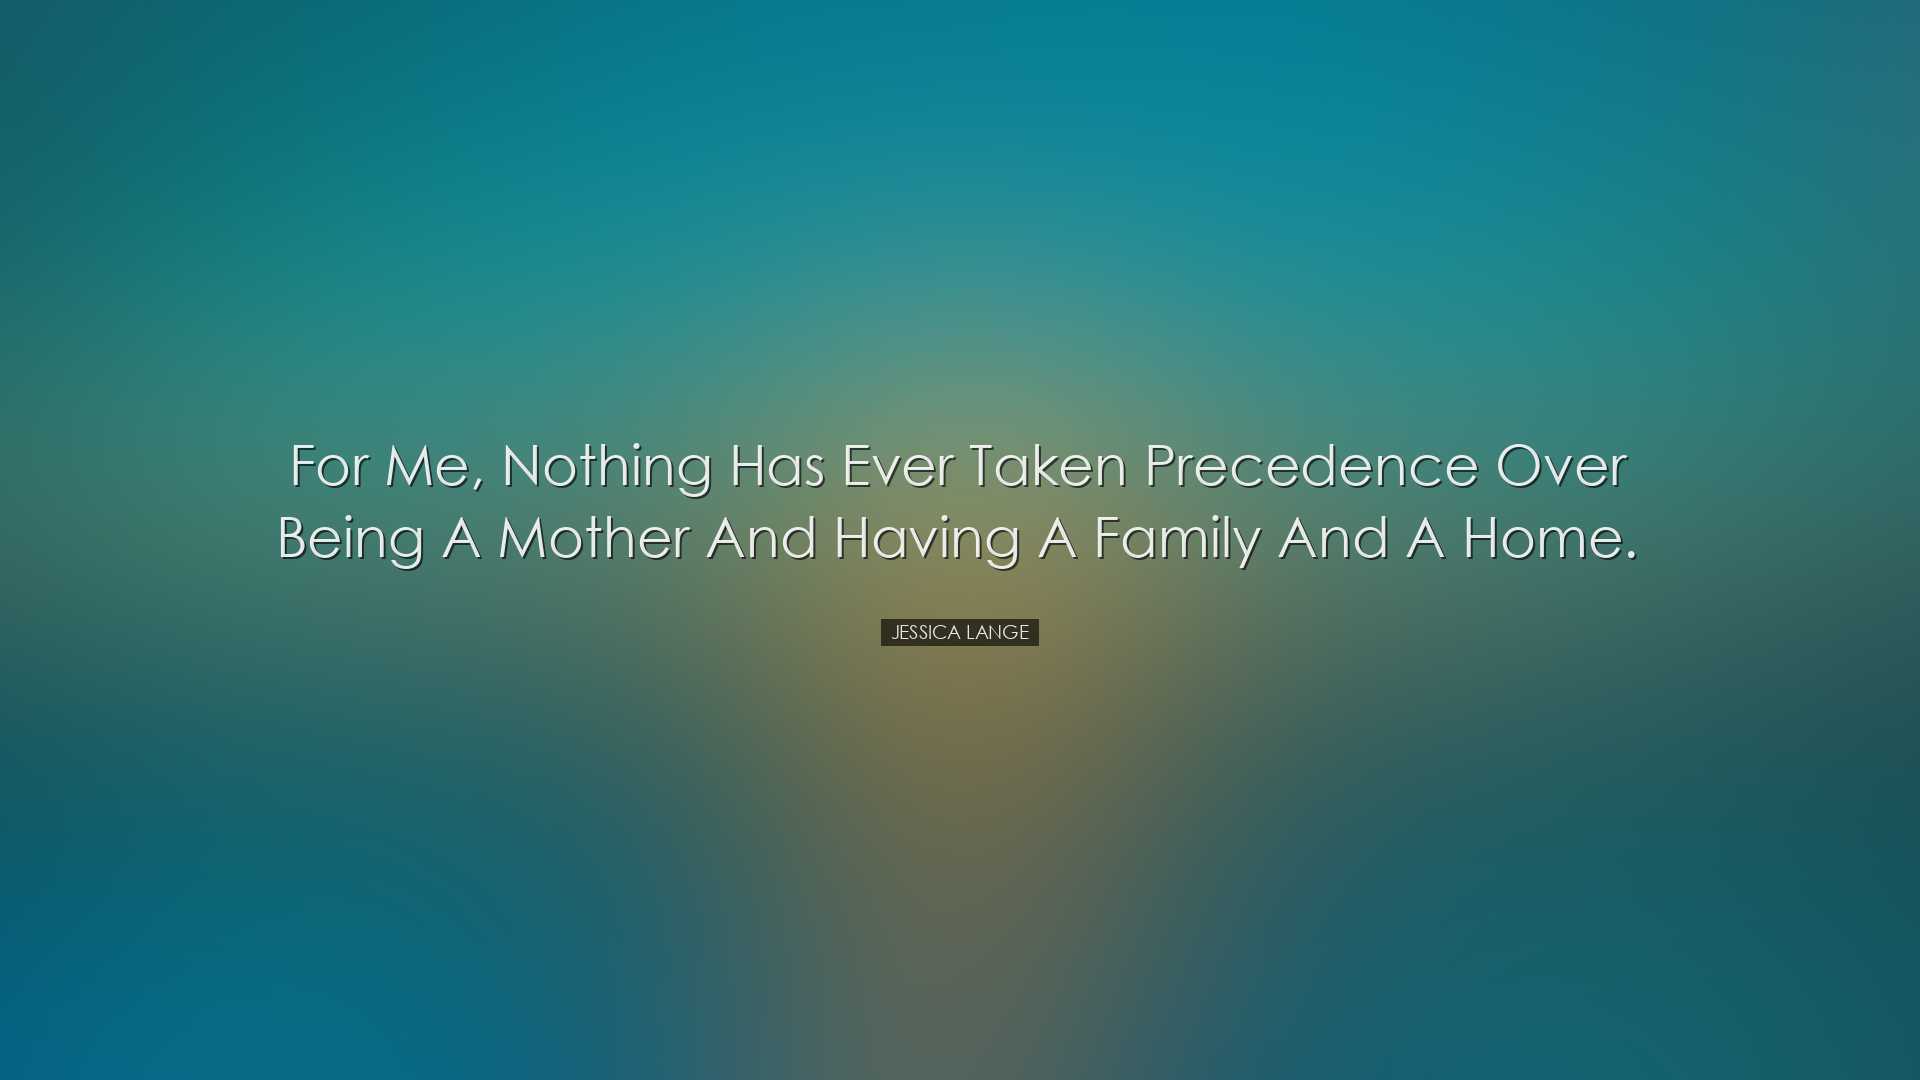 For me, nothing has ever taken precedence over being a mother and